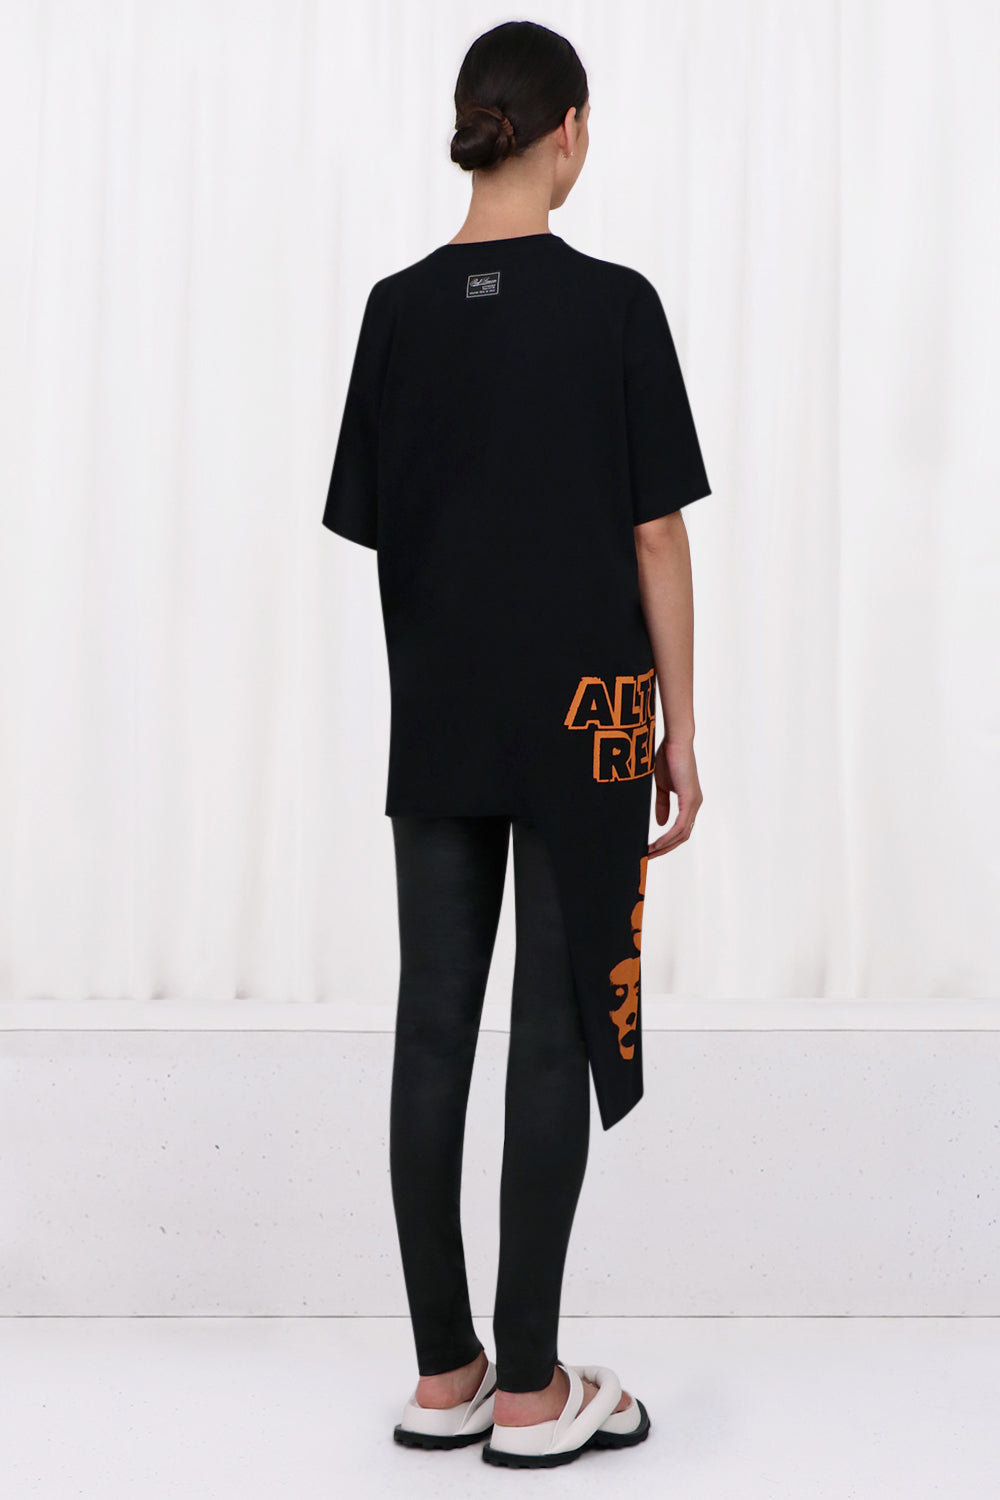 RAF SIMONS Altered Reality Cut Out shirt